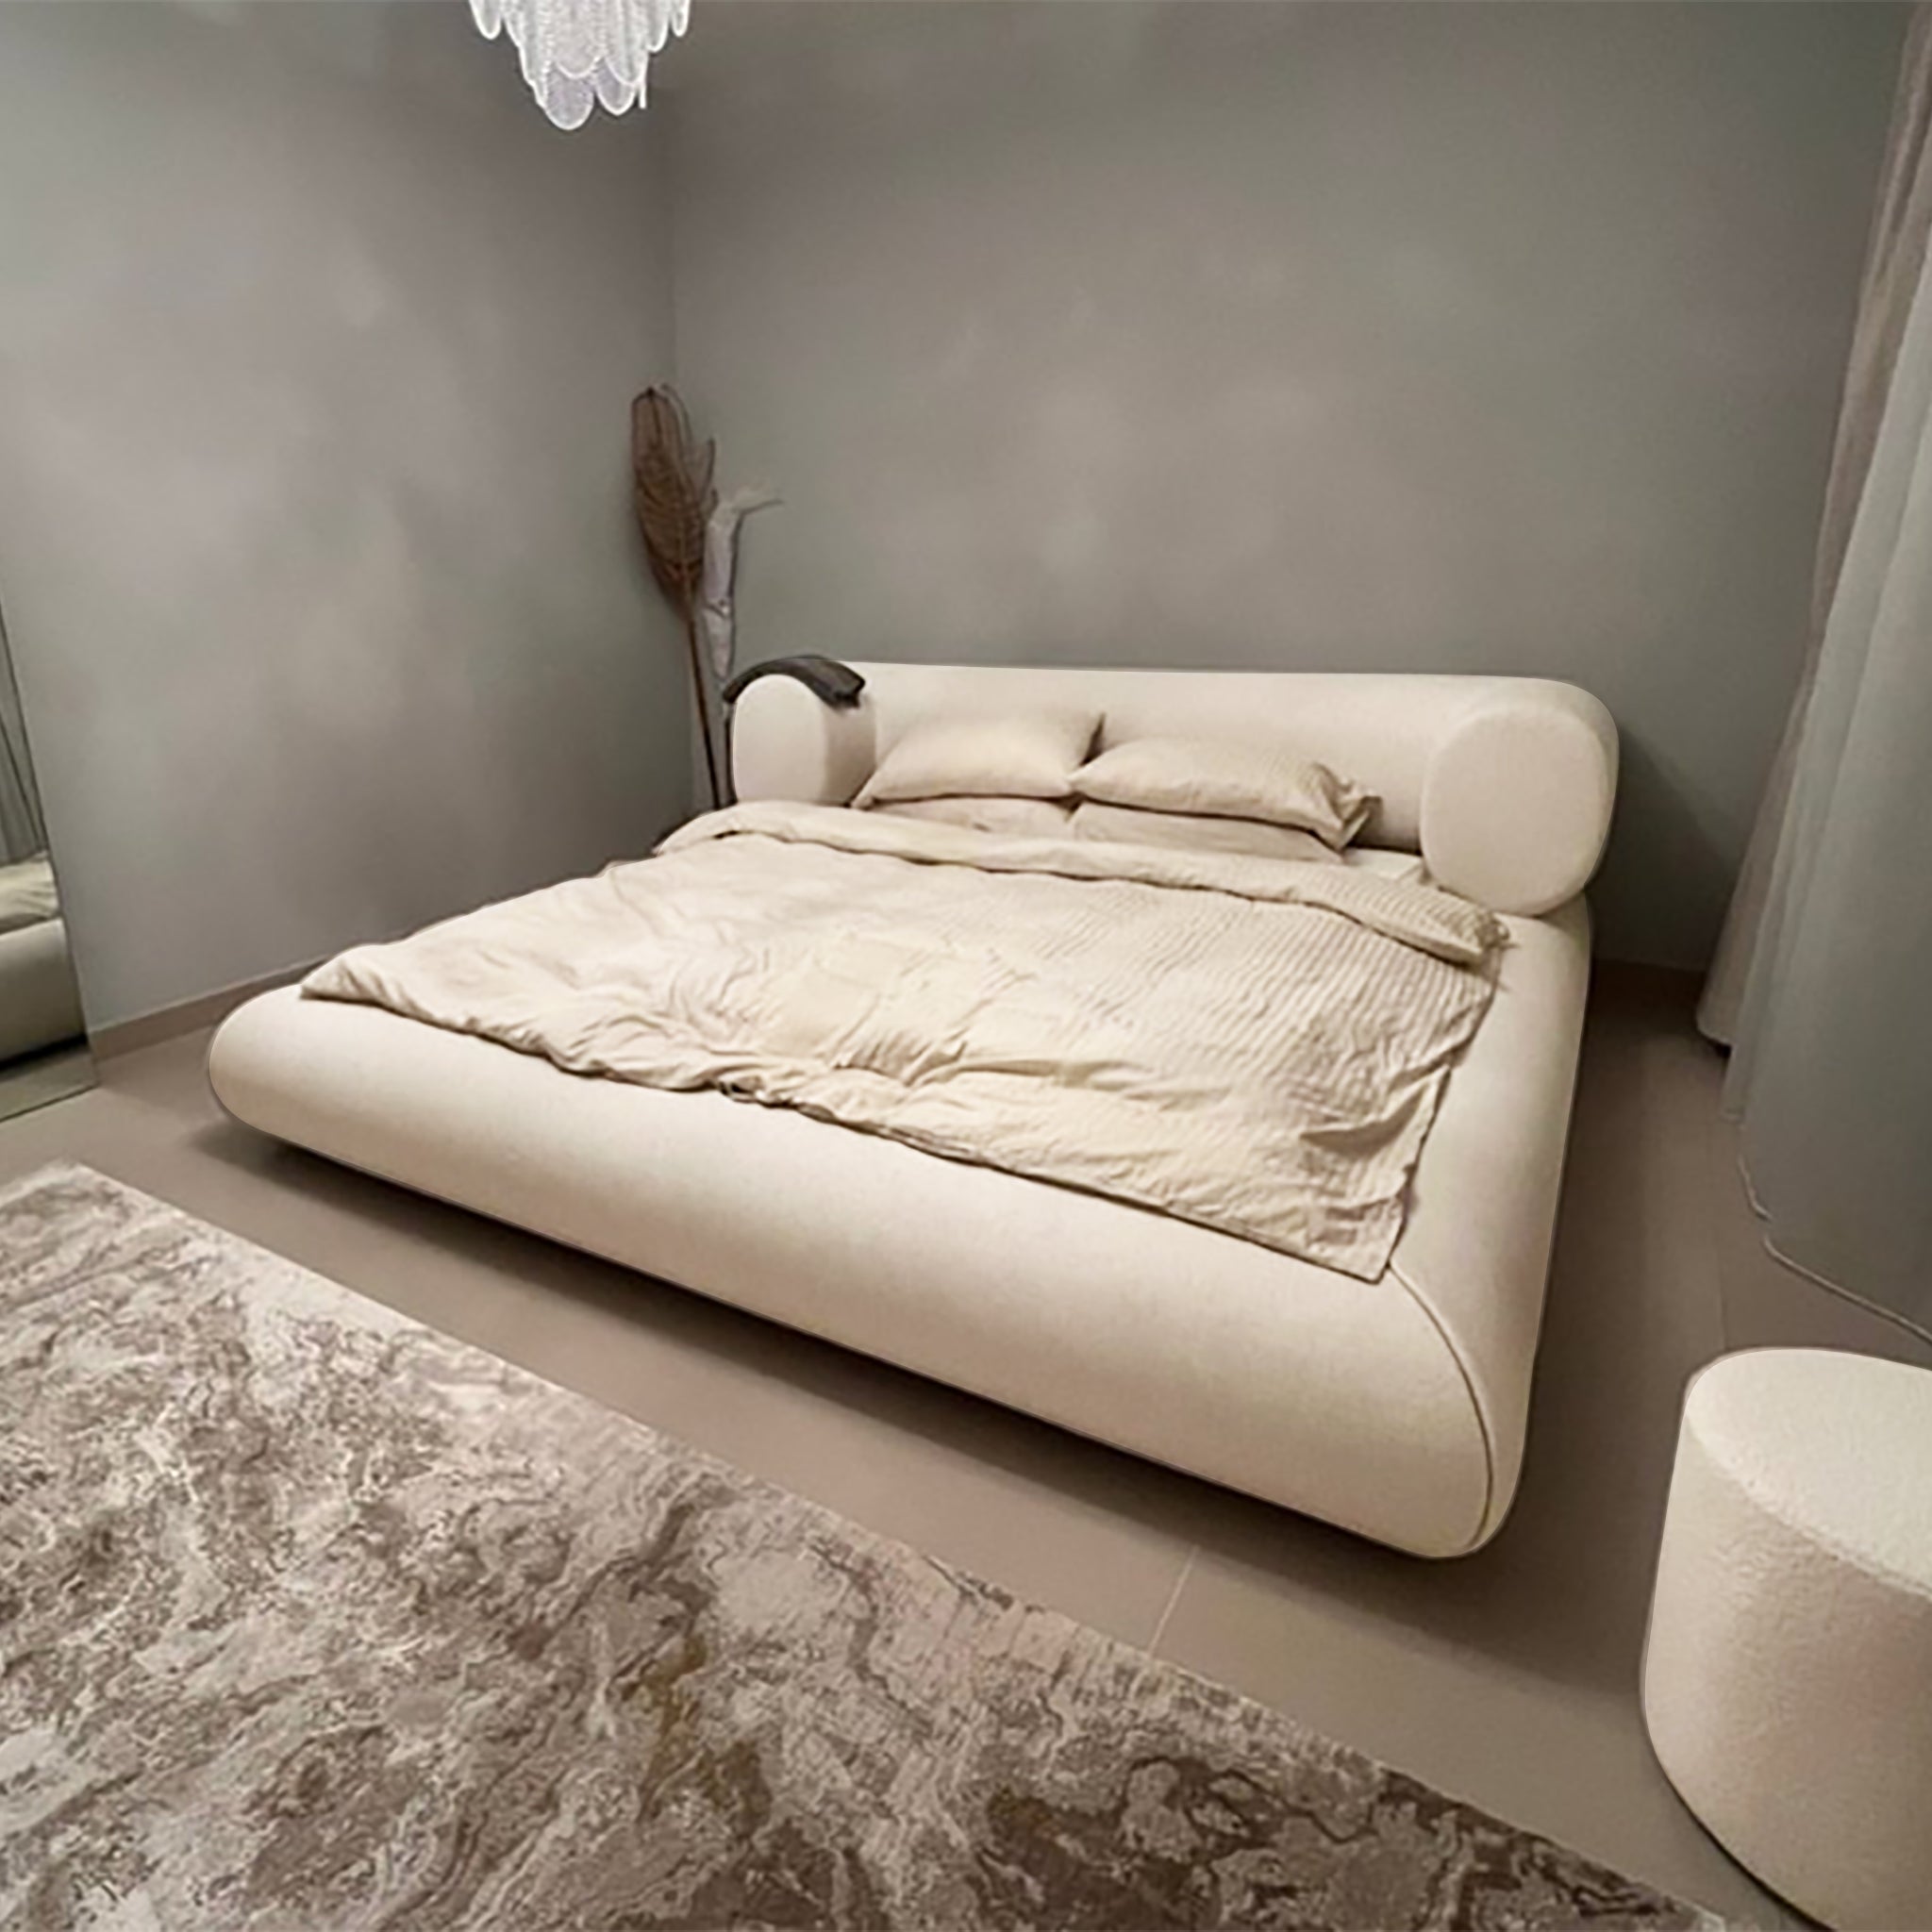 Elegant platform bed with a curved, button-tufted headboard in a bright and airy bedroom. The Lewis Bed by Klettkic offers a touch of modern luxury for a restful sleep experience.